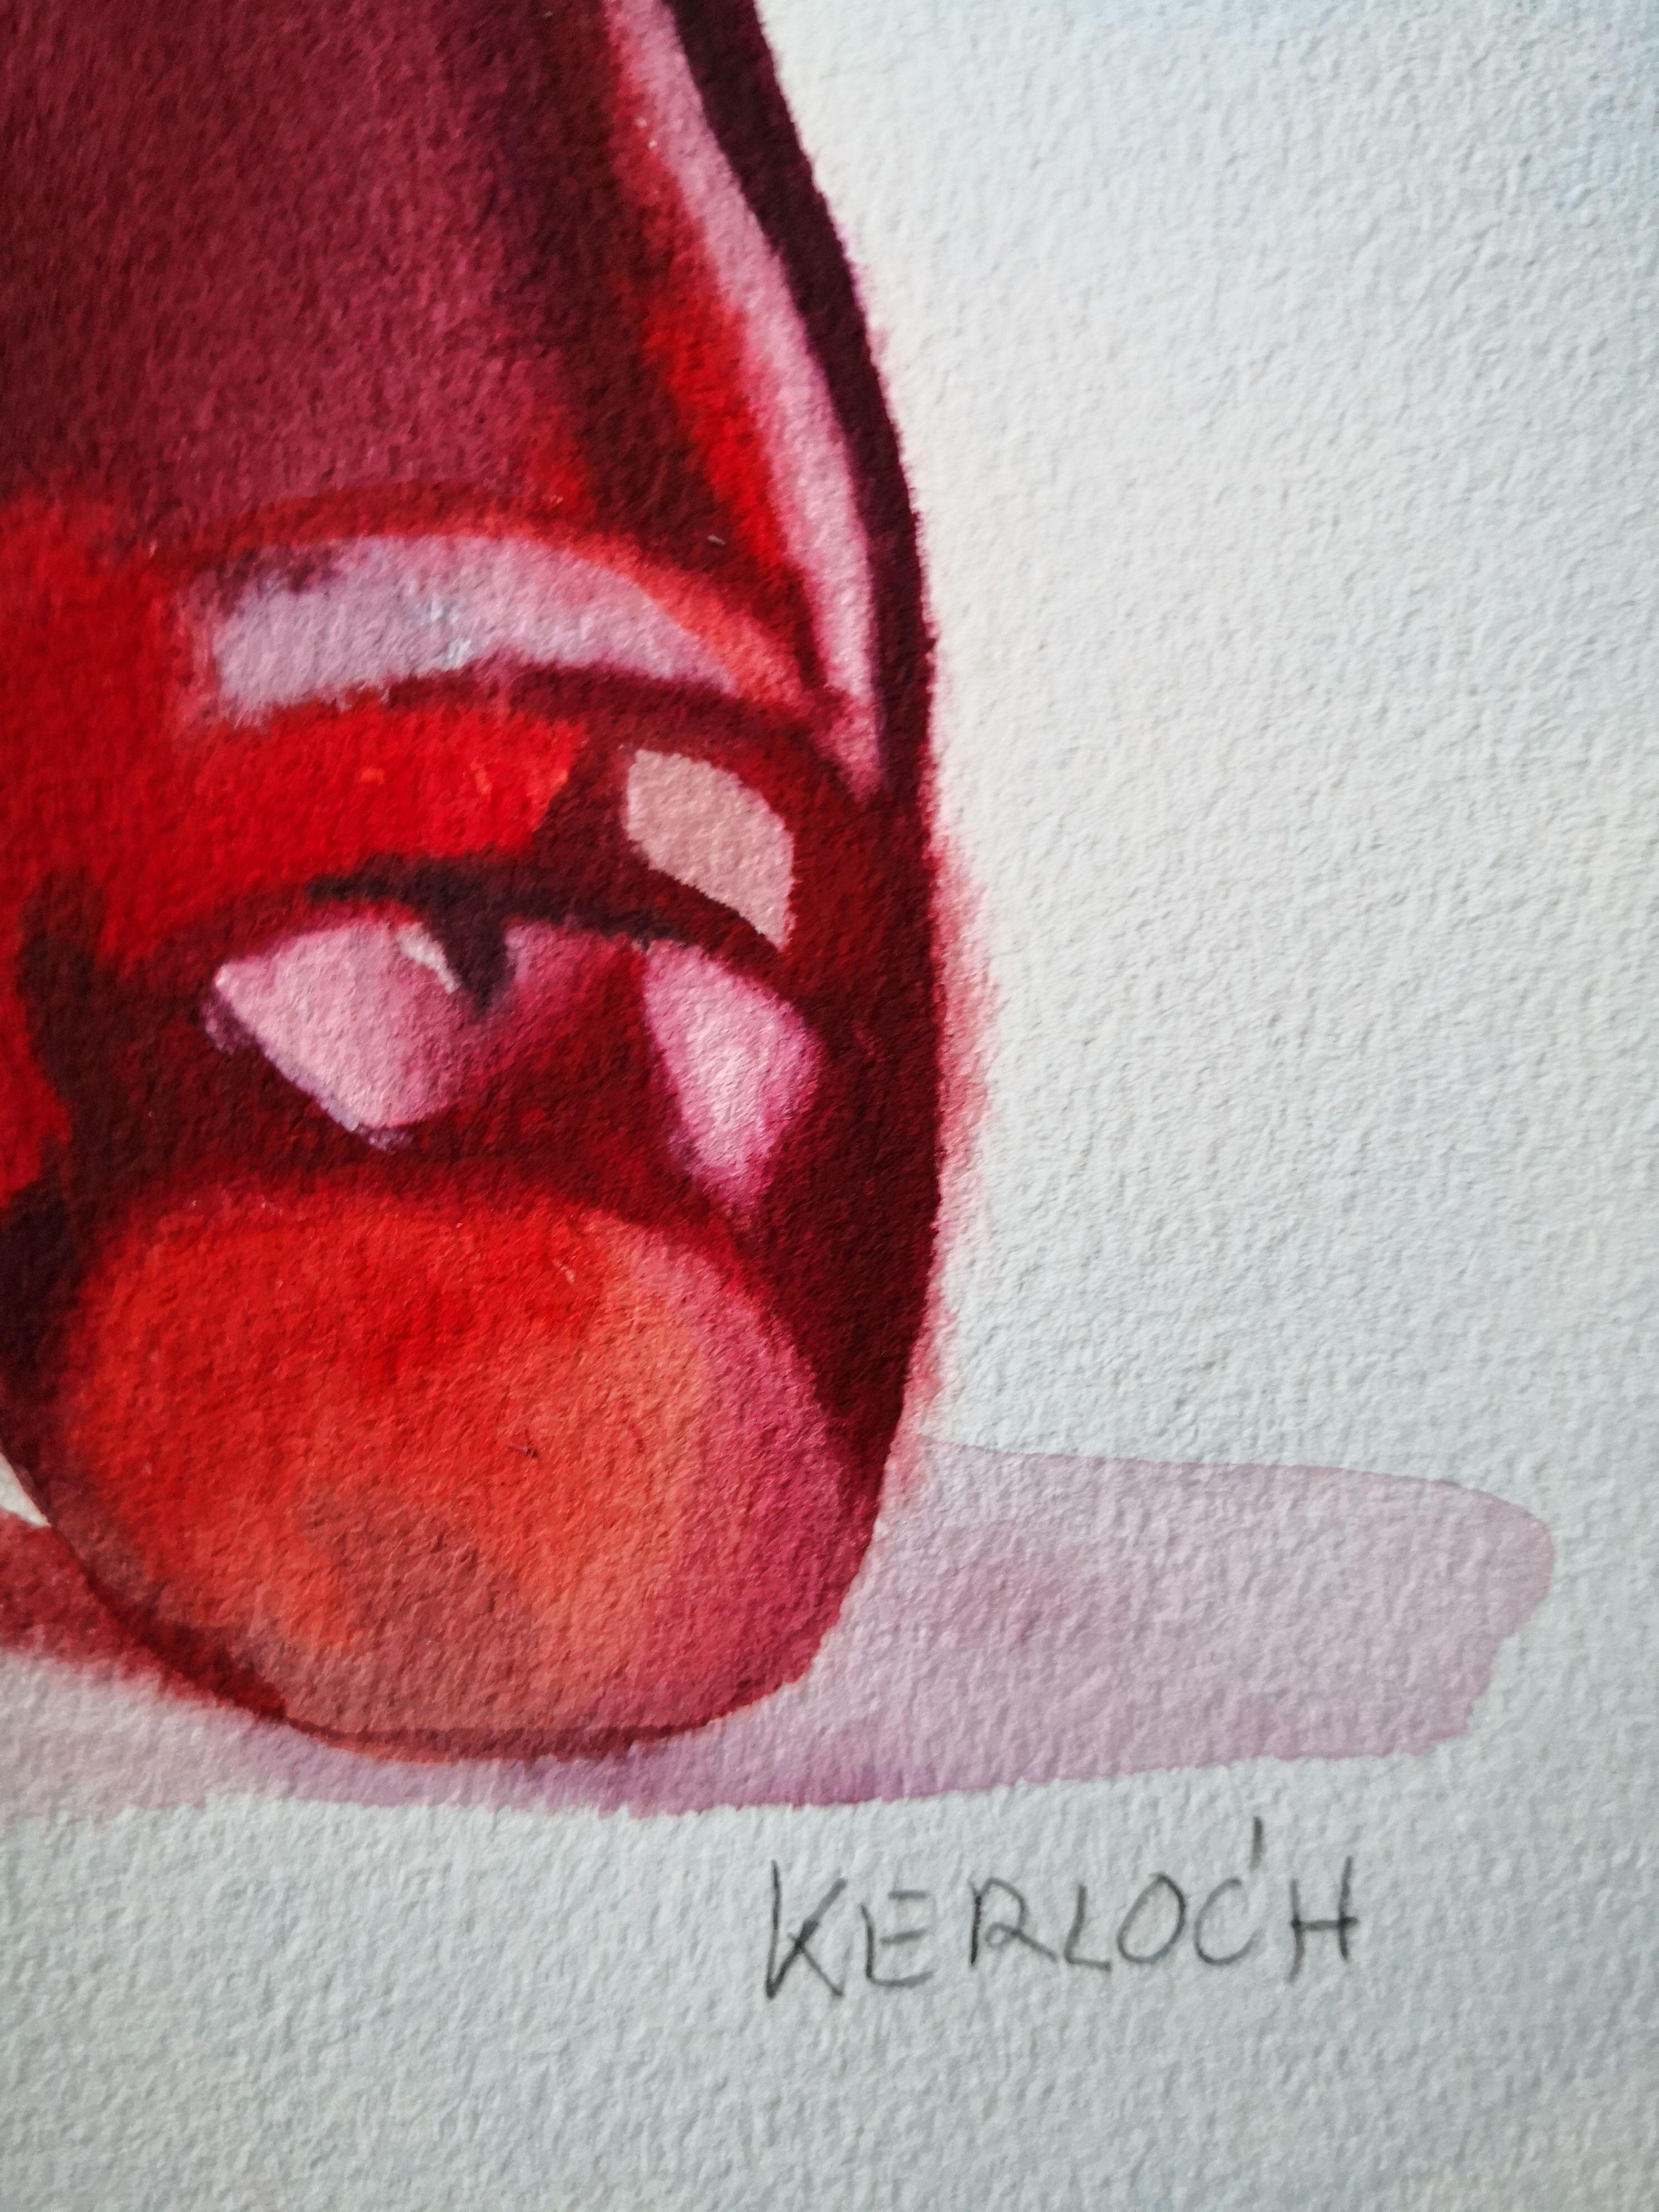 Red Gummy Bear, Painting, Watercolor on Paper 2